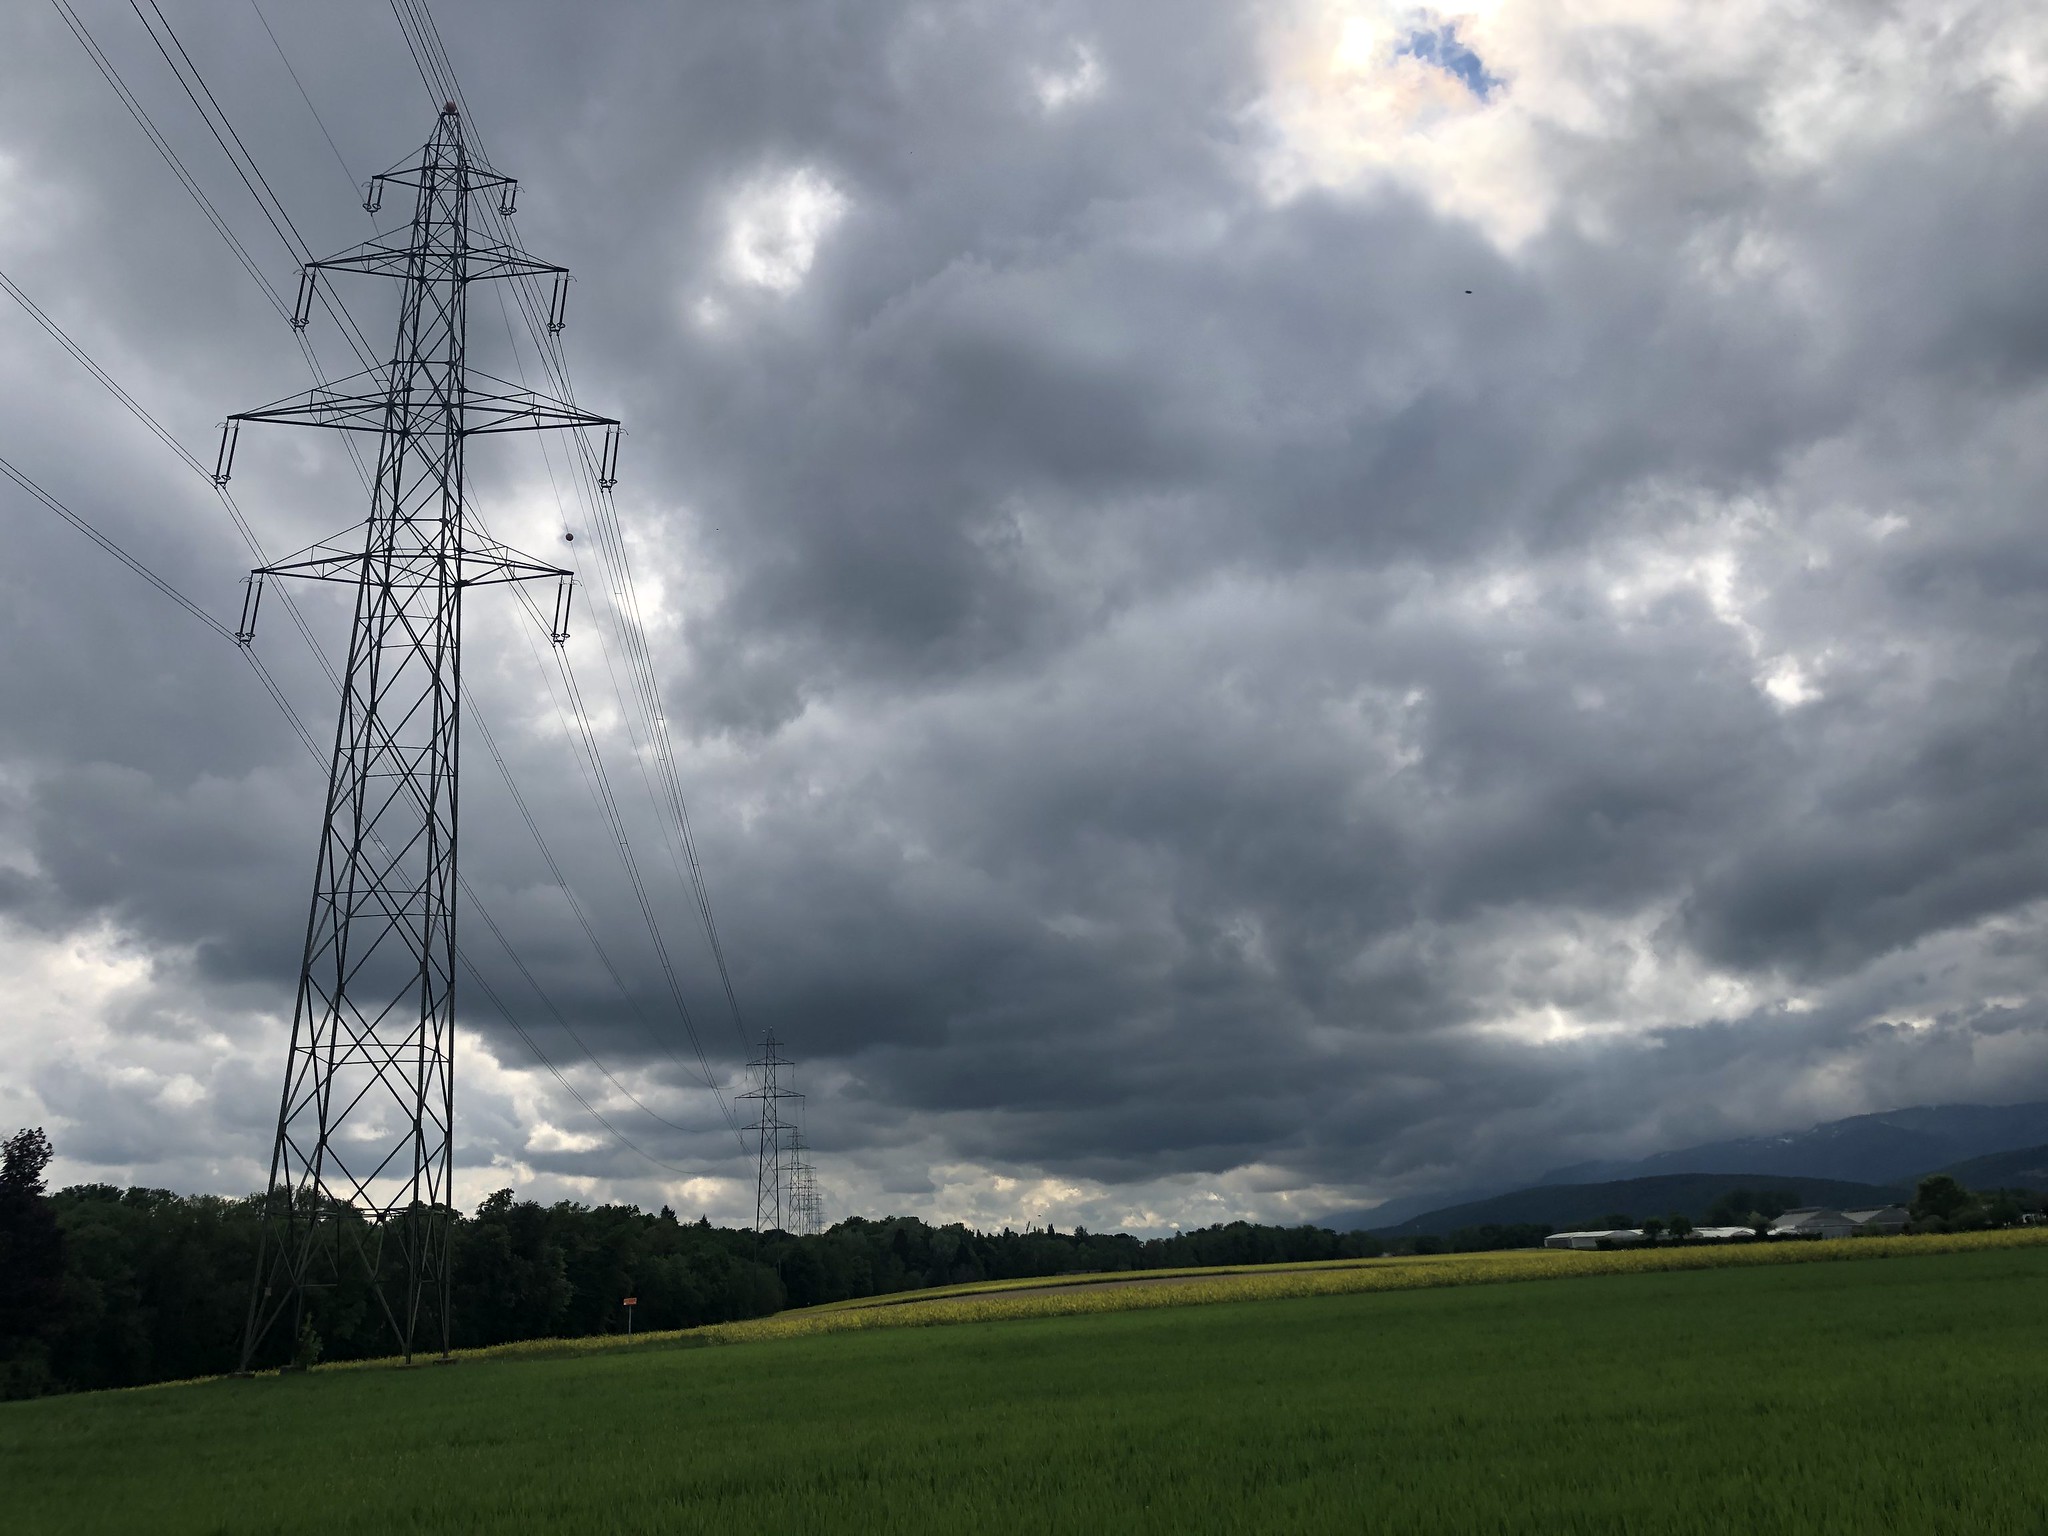 Day 42 of Self-Isolation in Switzerland – A Few Minutes of Rain